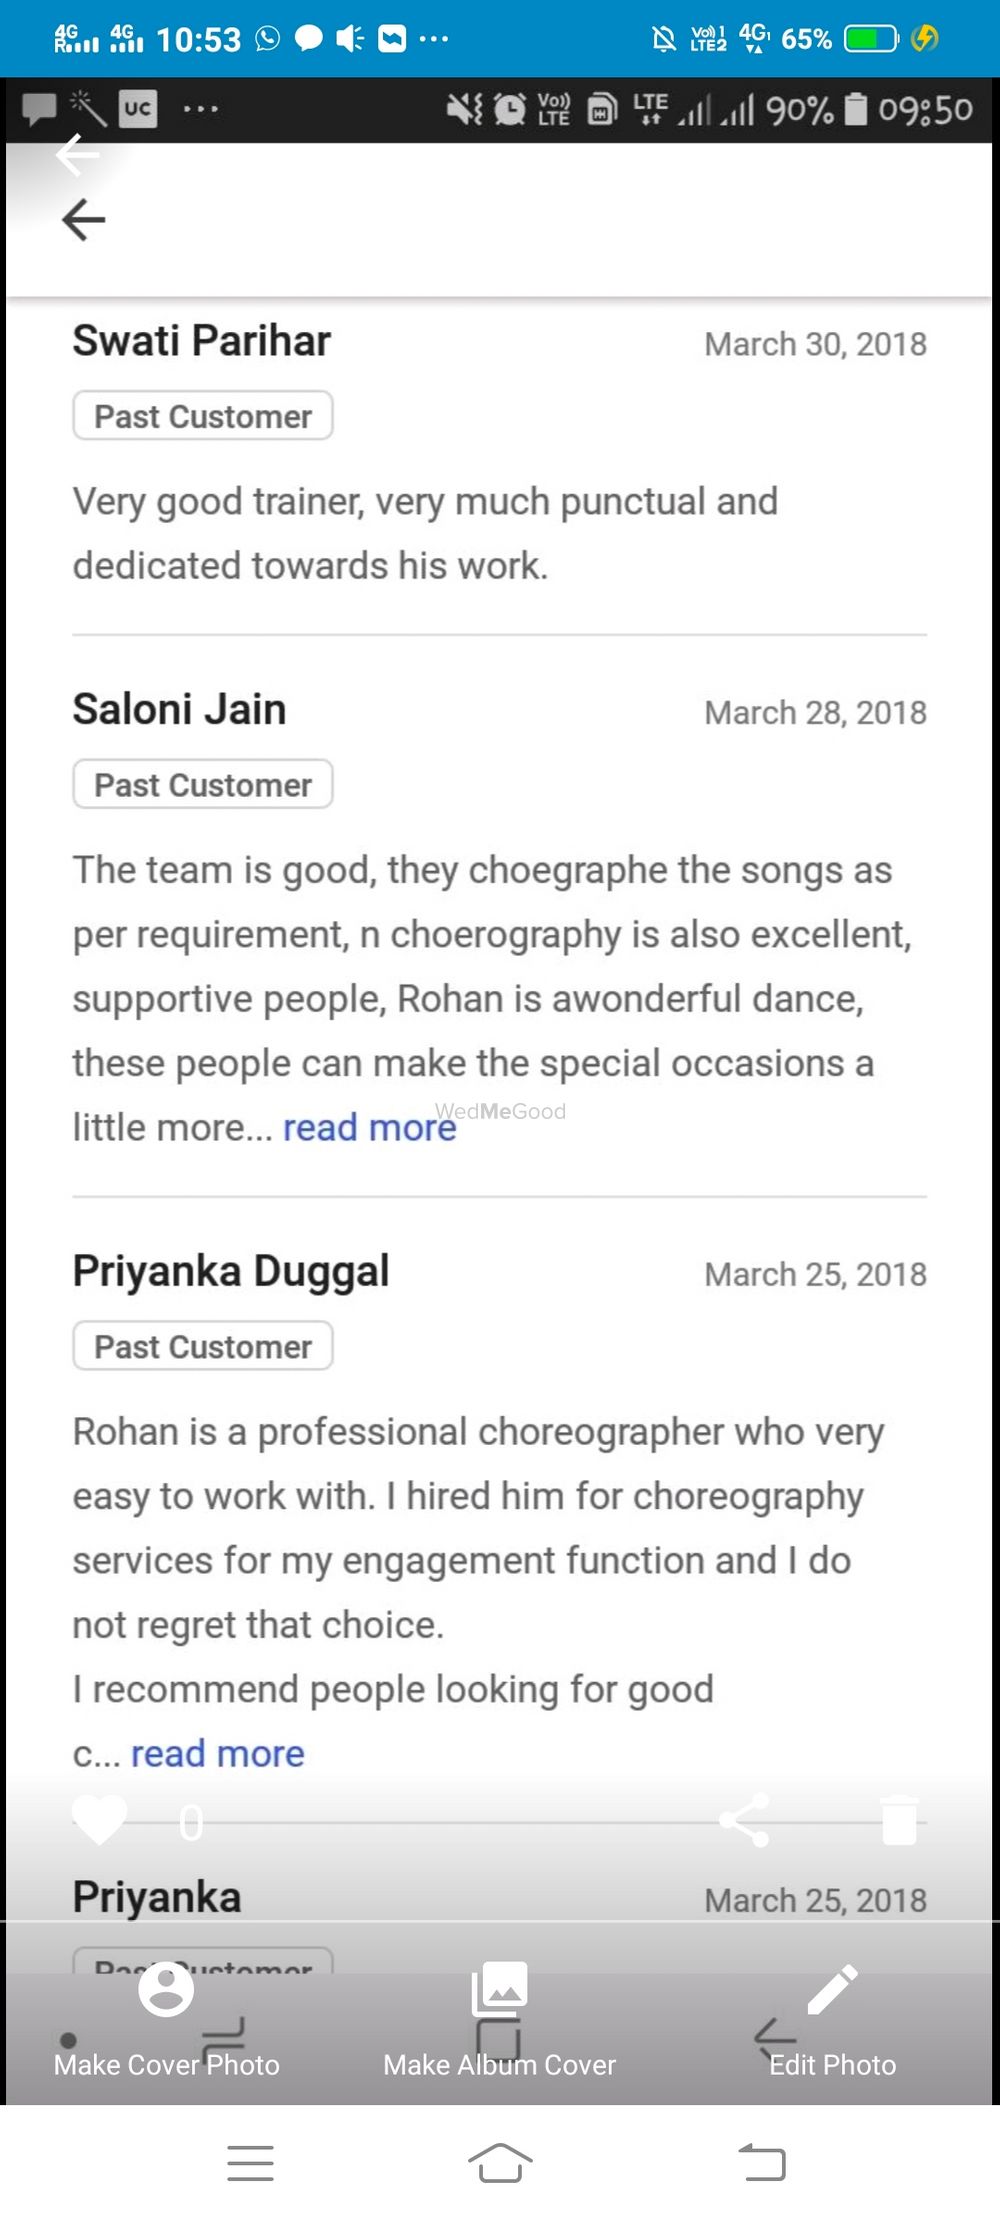 Photo From Reviews - By Rohan Dance and Wedding Choreography